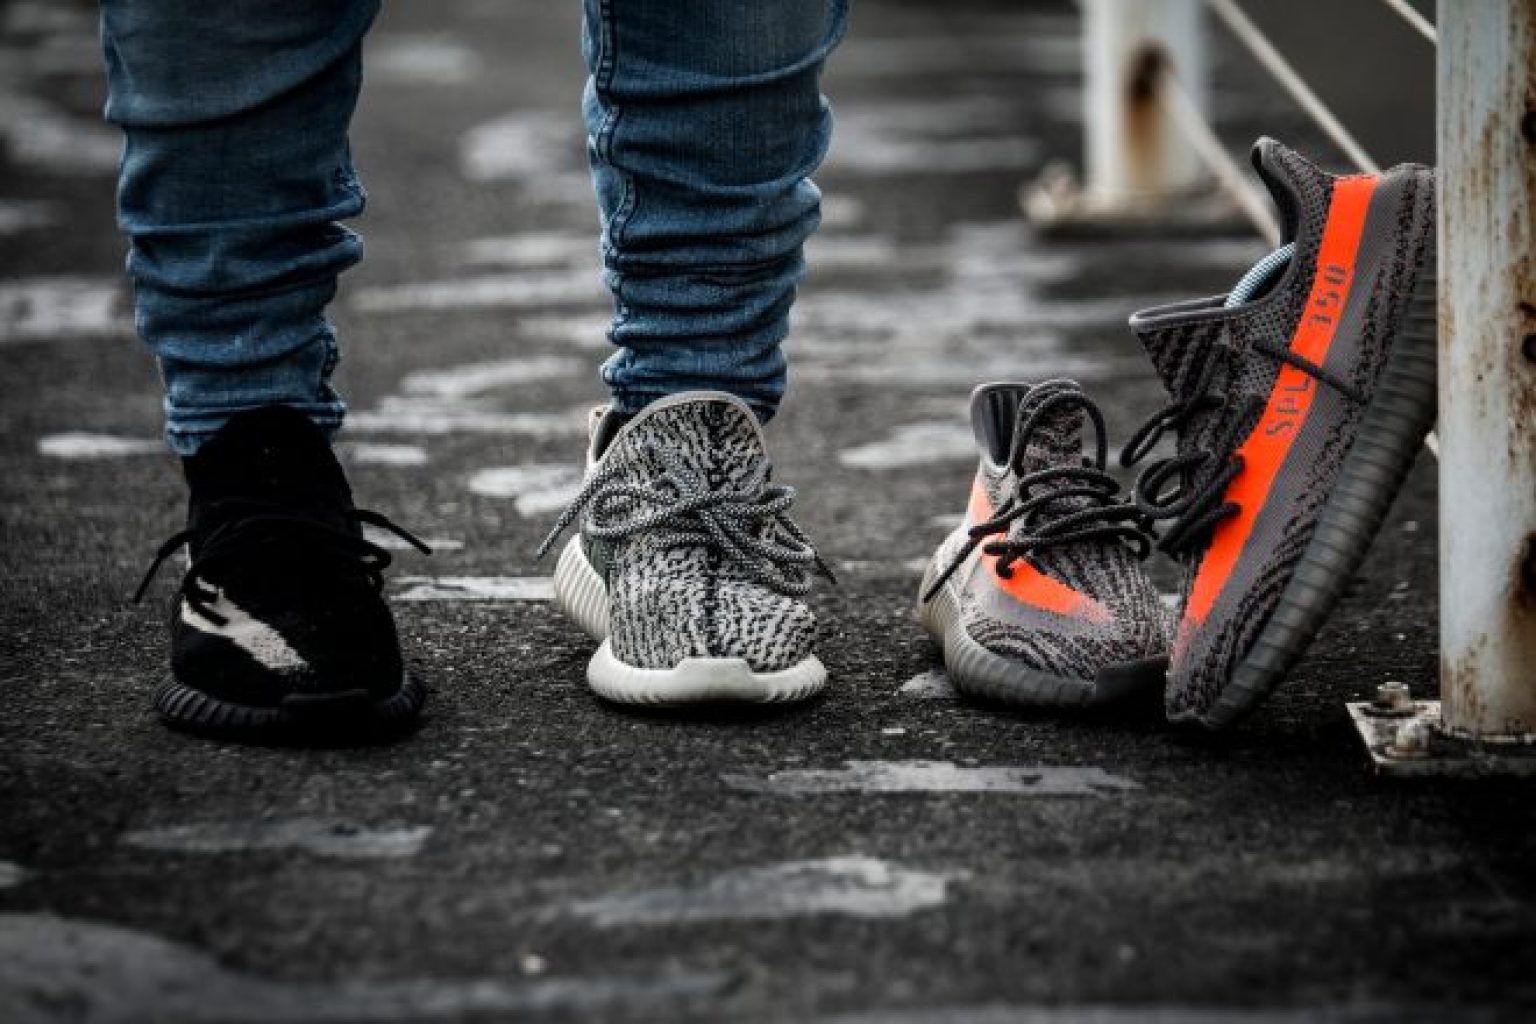 Yeezy Shoe Size Chart: Yeezy Size Compared To Nike Size - The Shoe Box NYC